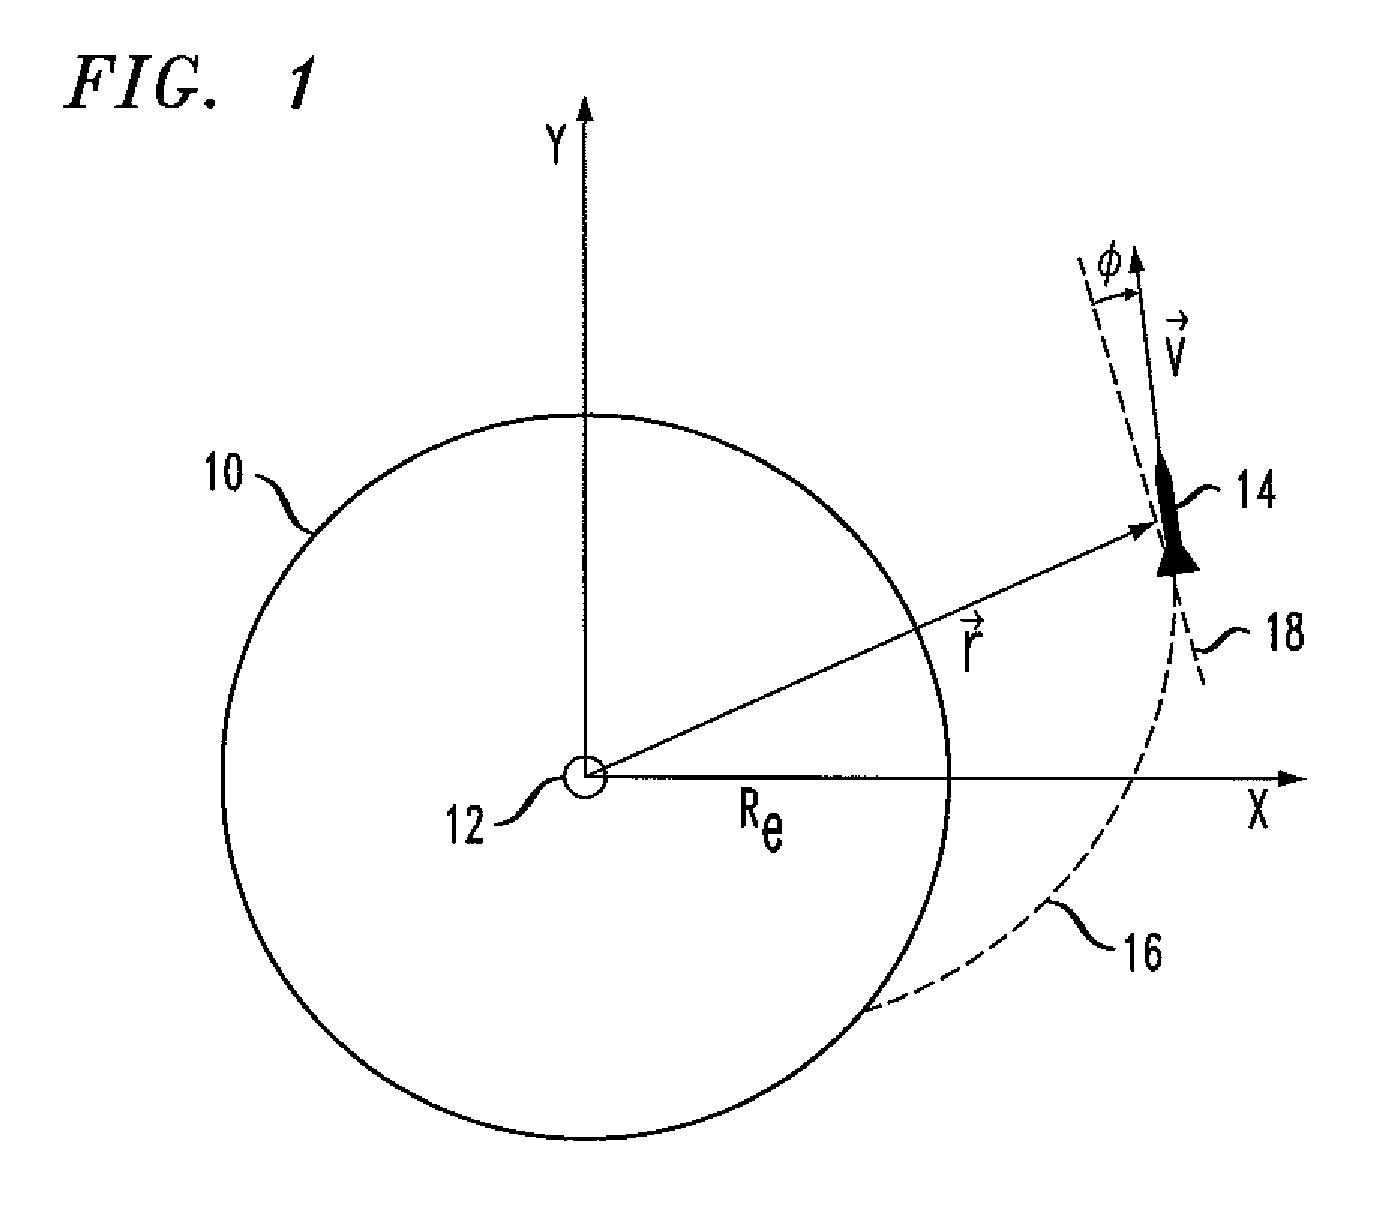 Method for targeting a preferred object within a group of decoys